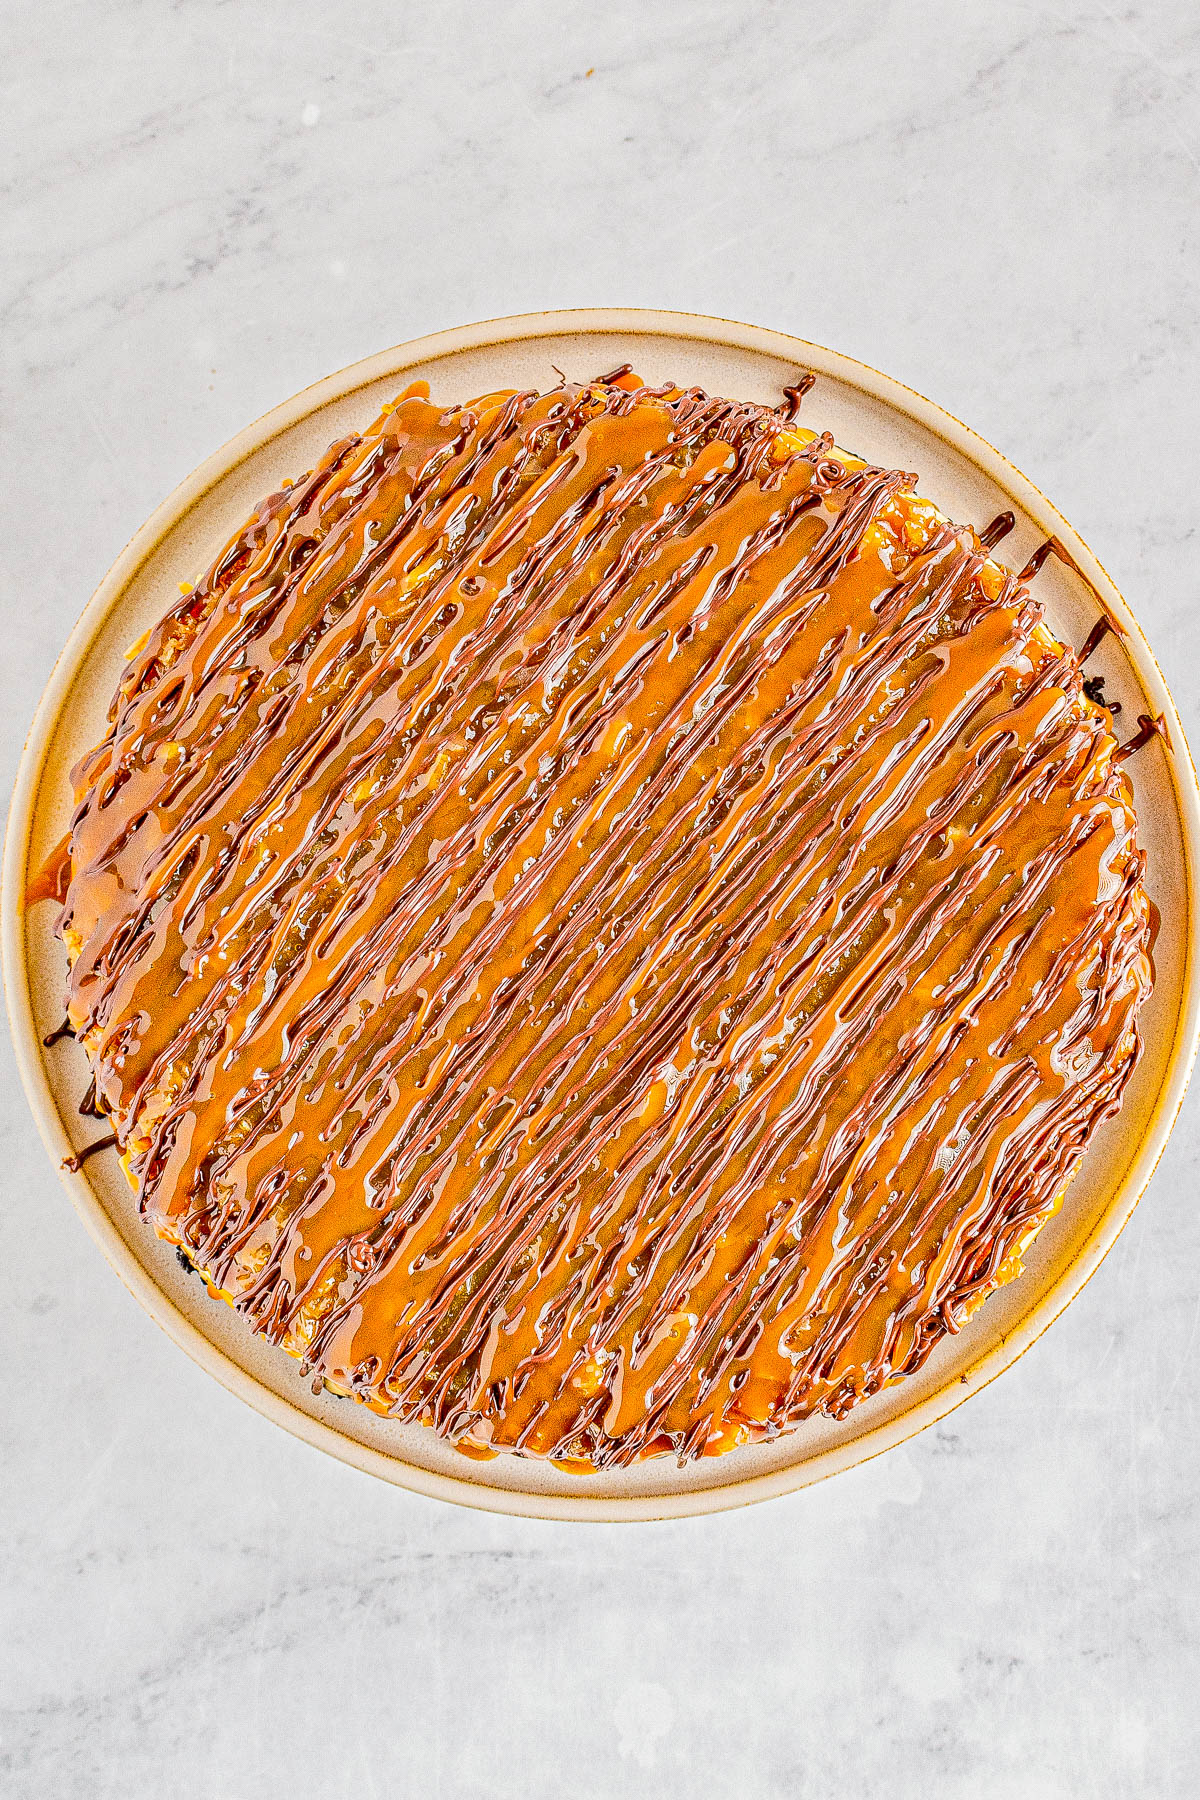 Samoa Cheesecake - Smooth, creamy cheesecake with an Oreo crust and topped with chewy toasted coconut, caramel, and chocolate! If you're a fan of Girl Scout Samoas Cookies, this homemade rich and decadent cheesecake with the same flavors is PURE PERFECTION! Clear and easy directions even if you've never made a cheesecake so yours turns out amazing.